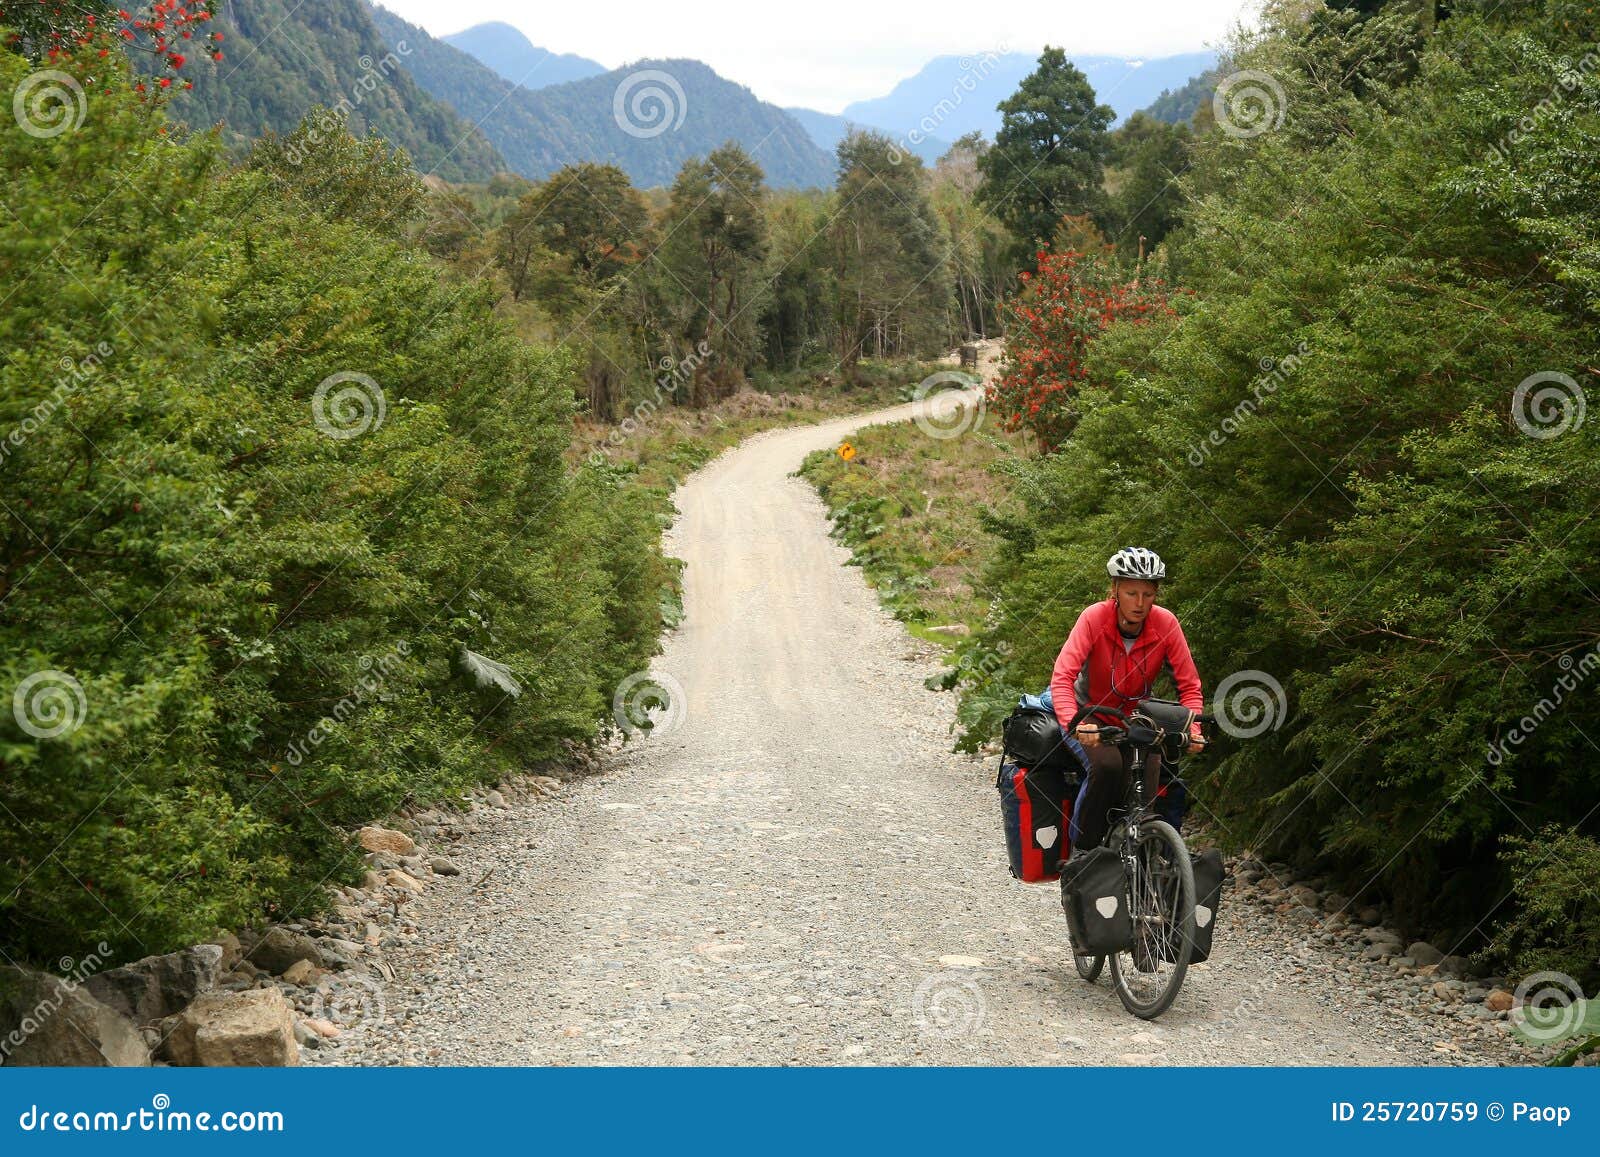 cycling on carretera austral